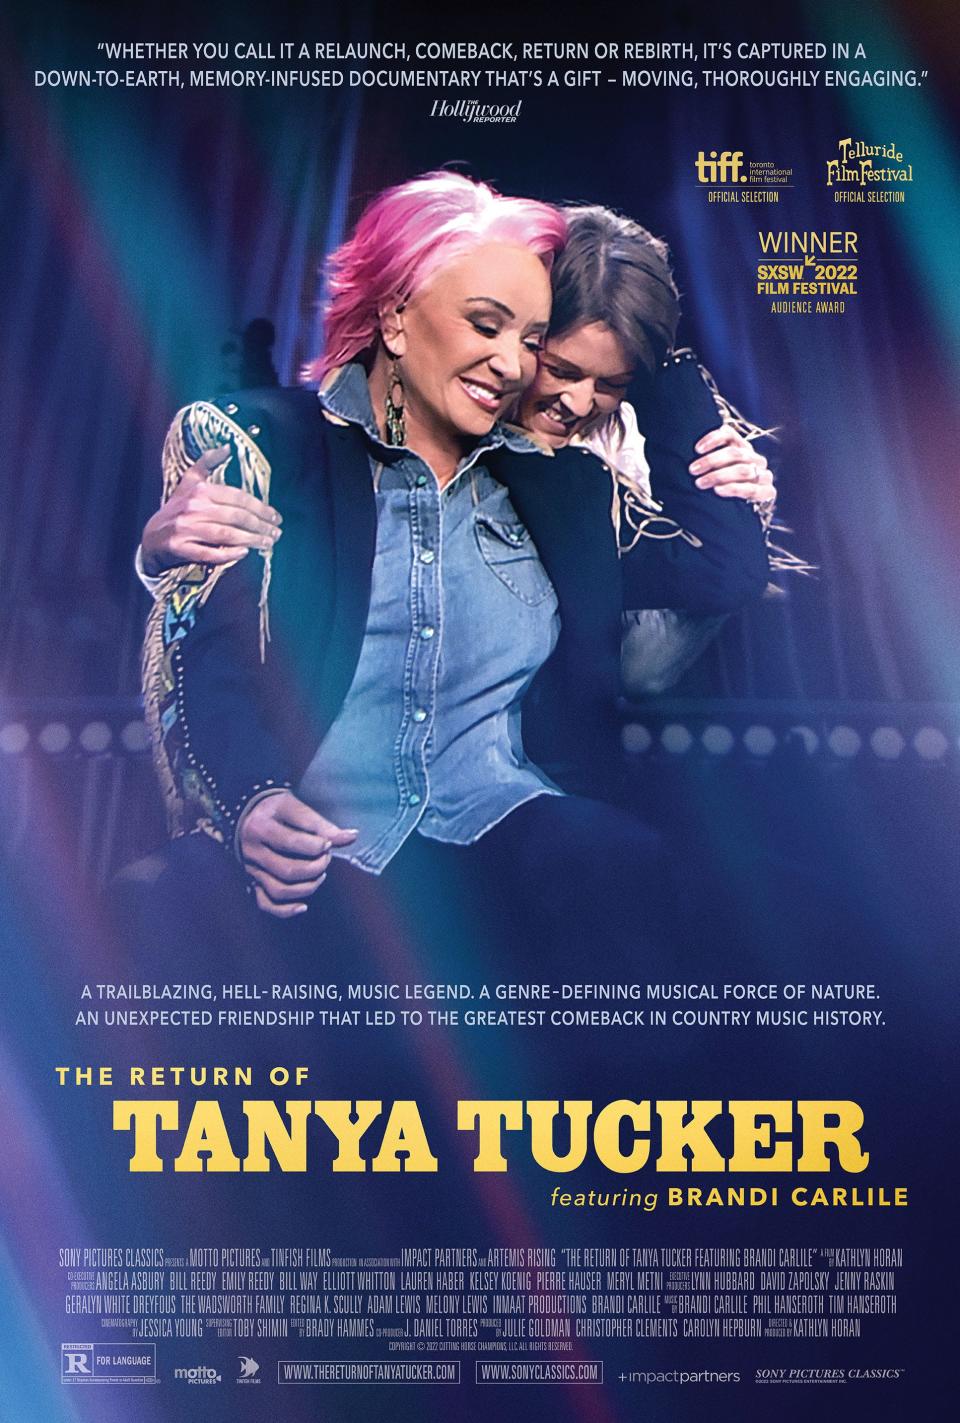 "The Return of Tanya Tucker (featuring Brandi Carlile)" debuts for mass release on Oct. 21 and chronicles the friendship between two generational country and pop icons, plus the release of Tucker's Grammy-winning album "While I'm Livin'"